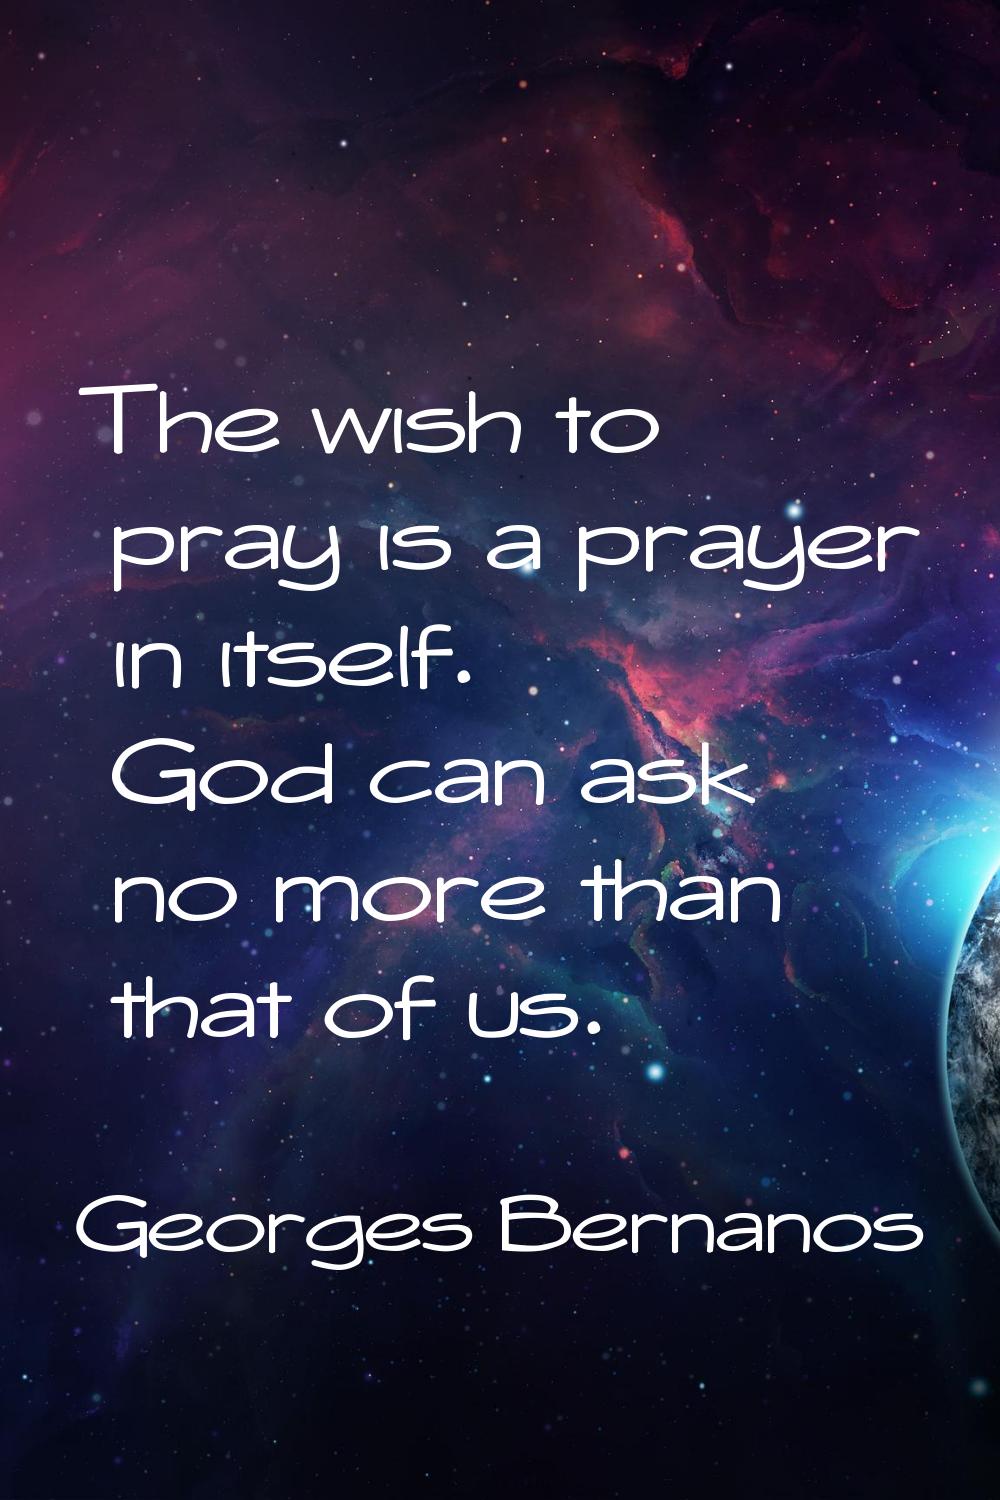 The wish to pray is a prayer in itself. God can ask no more than that of us.